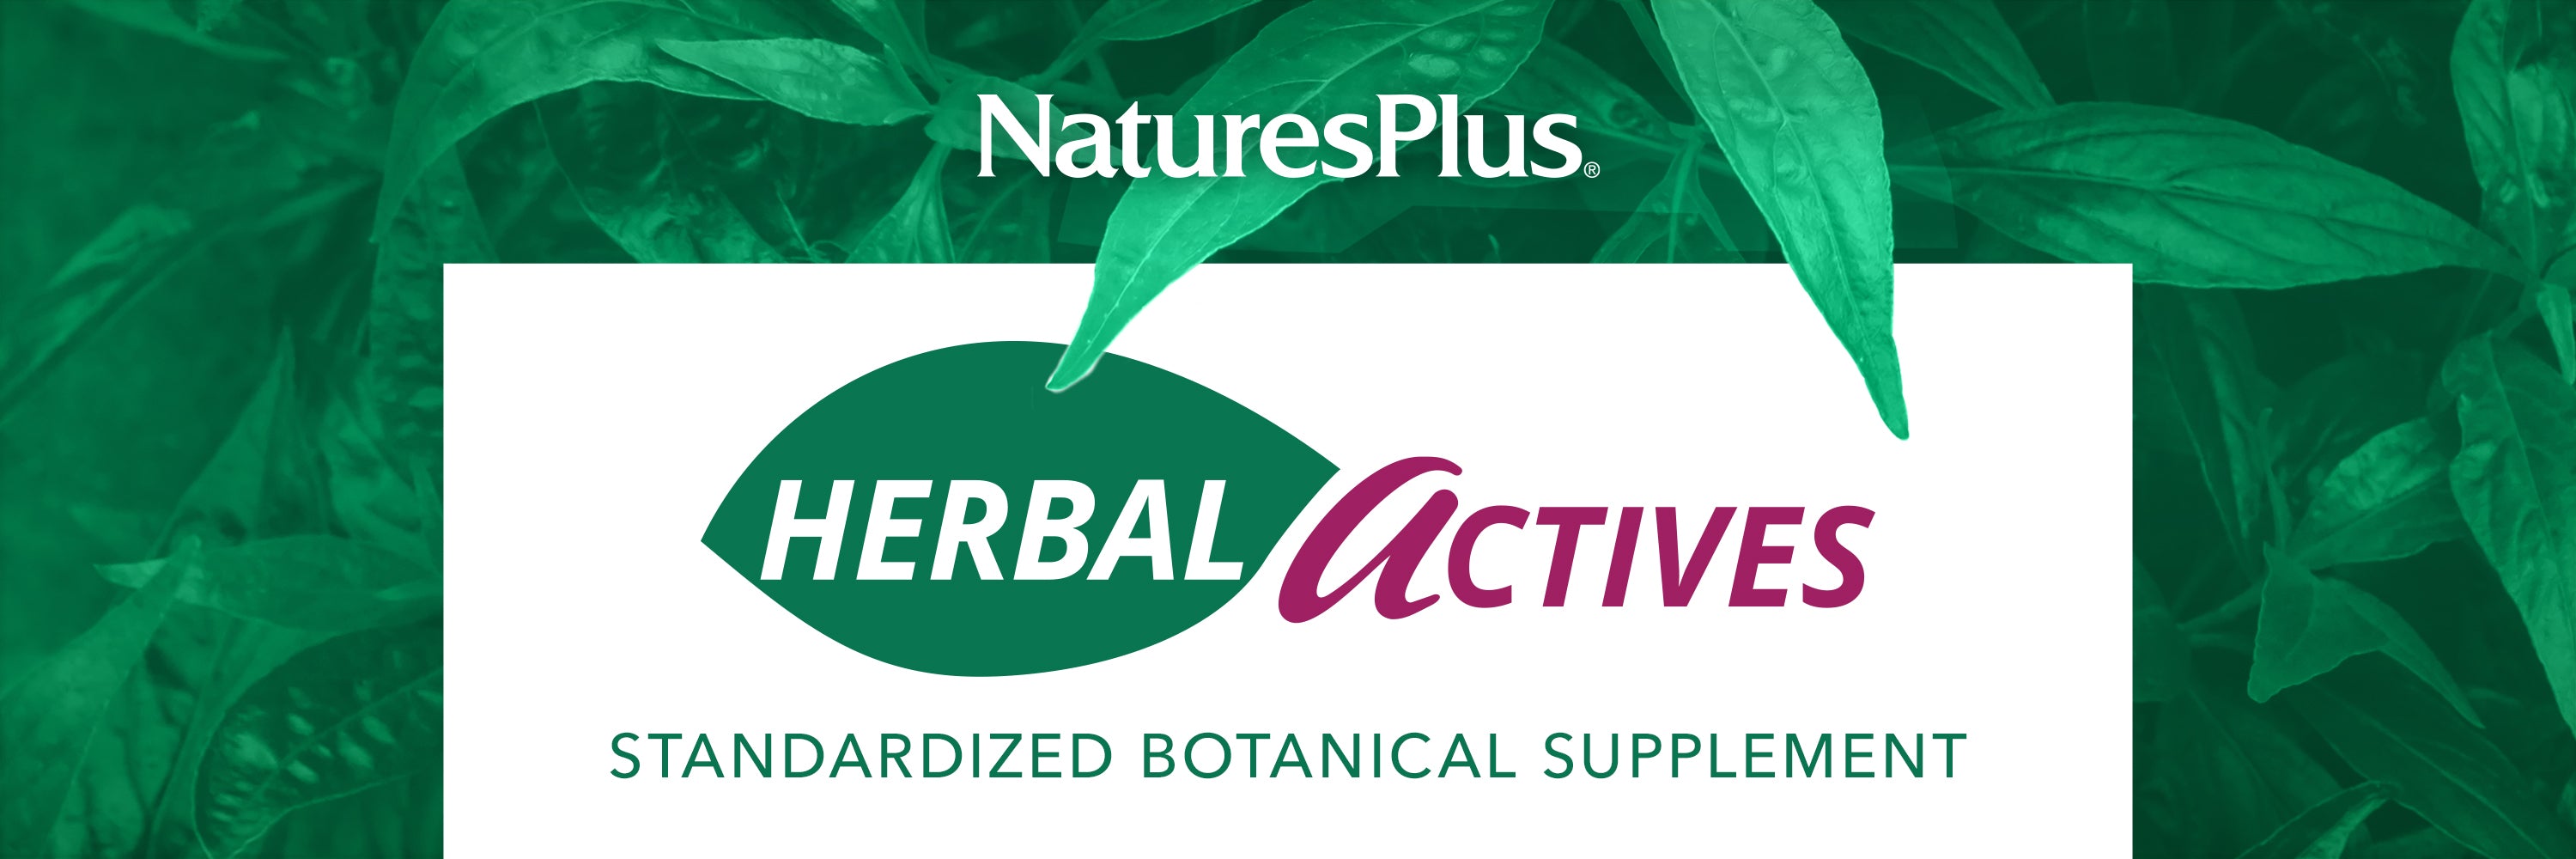 Herbal Actives collection image banner